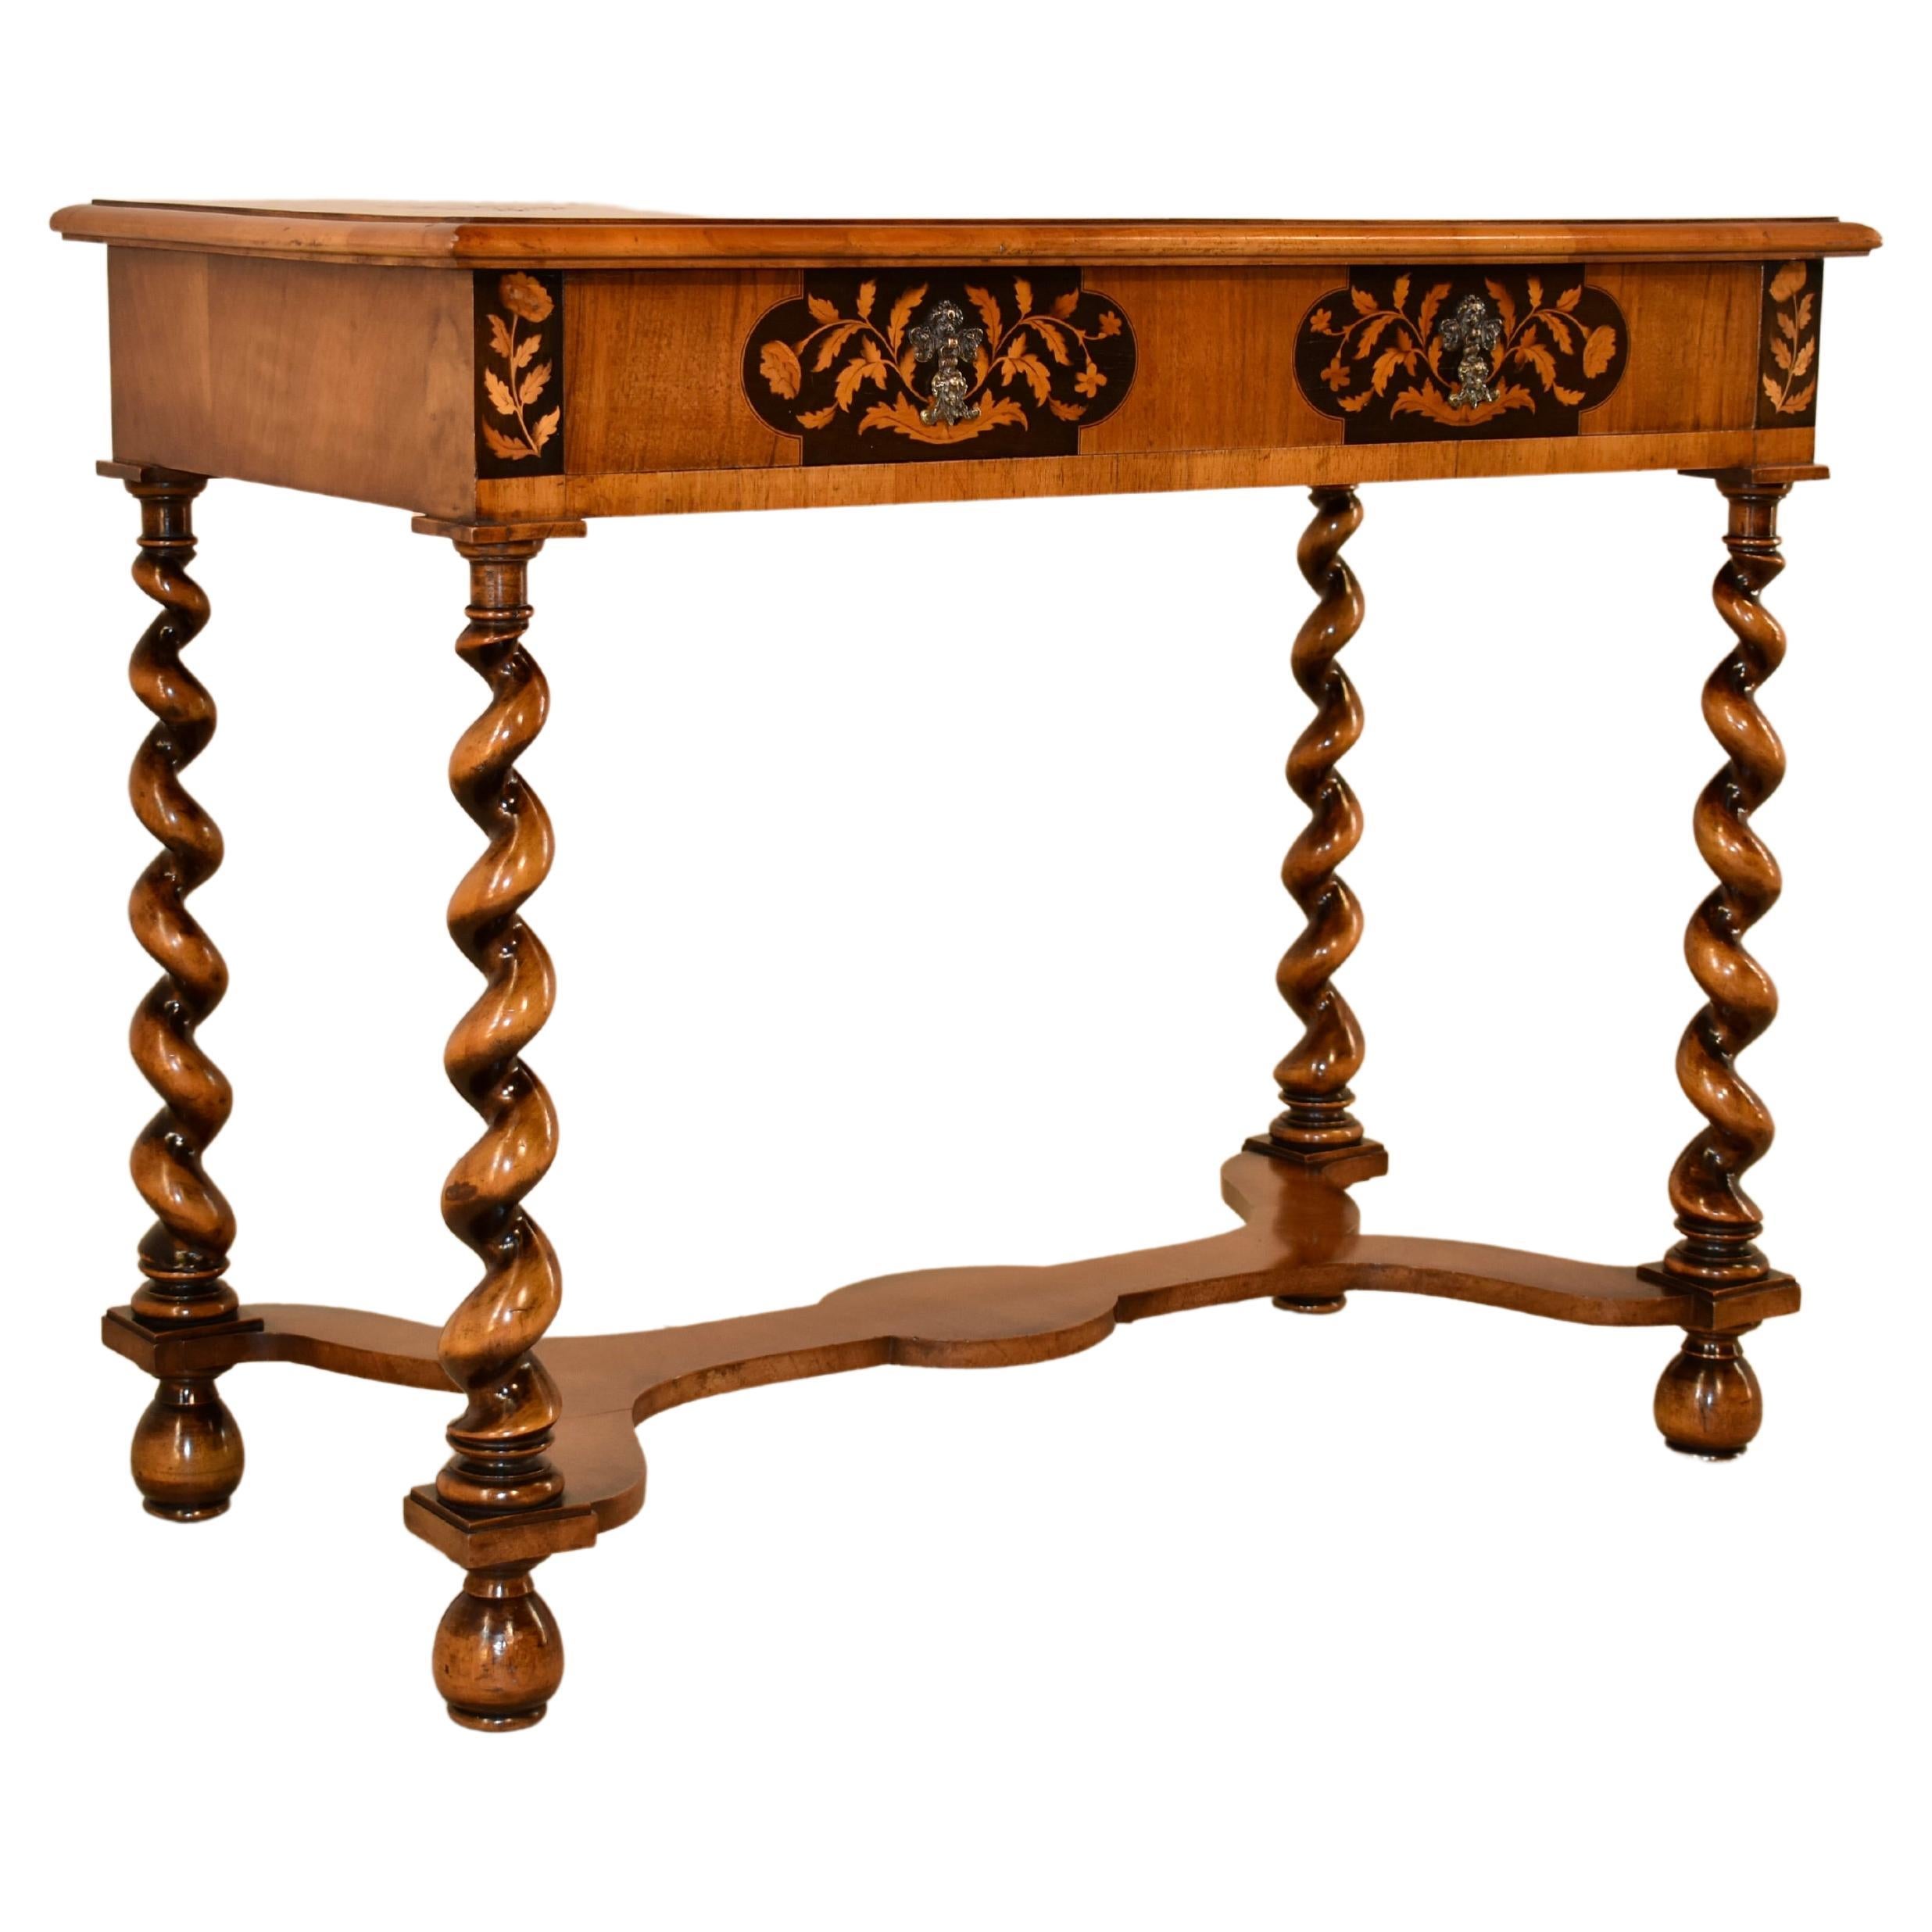 Edwardian English Marquetry Side Table, c. 1900